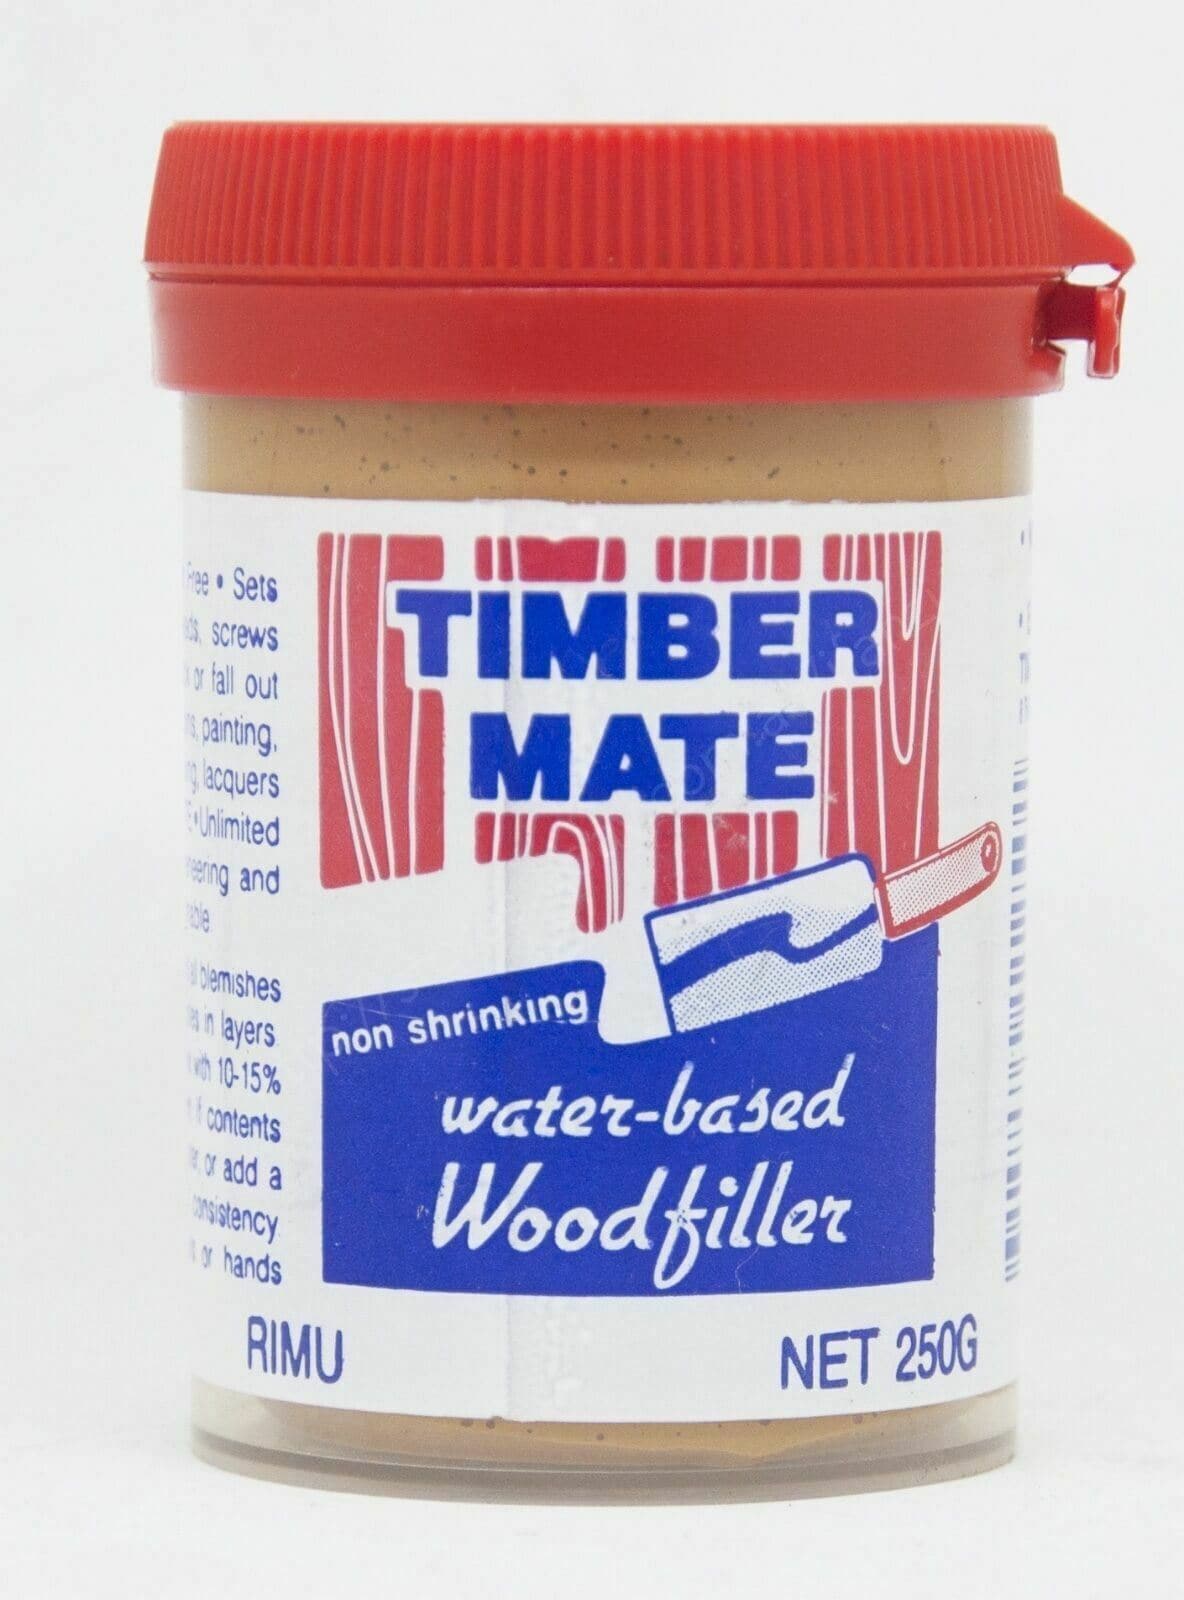 Timber Mate Water-based Wood Filler 250g RIMU TR25 - Double Bay Hardware